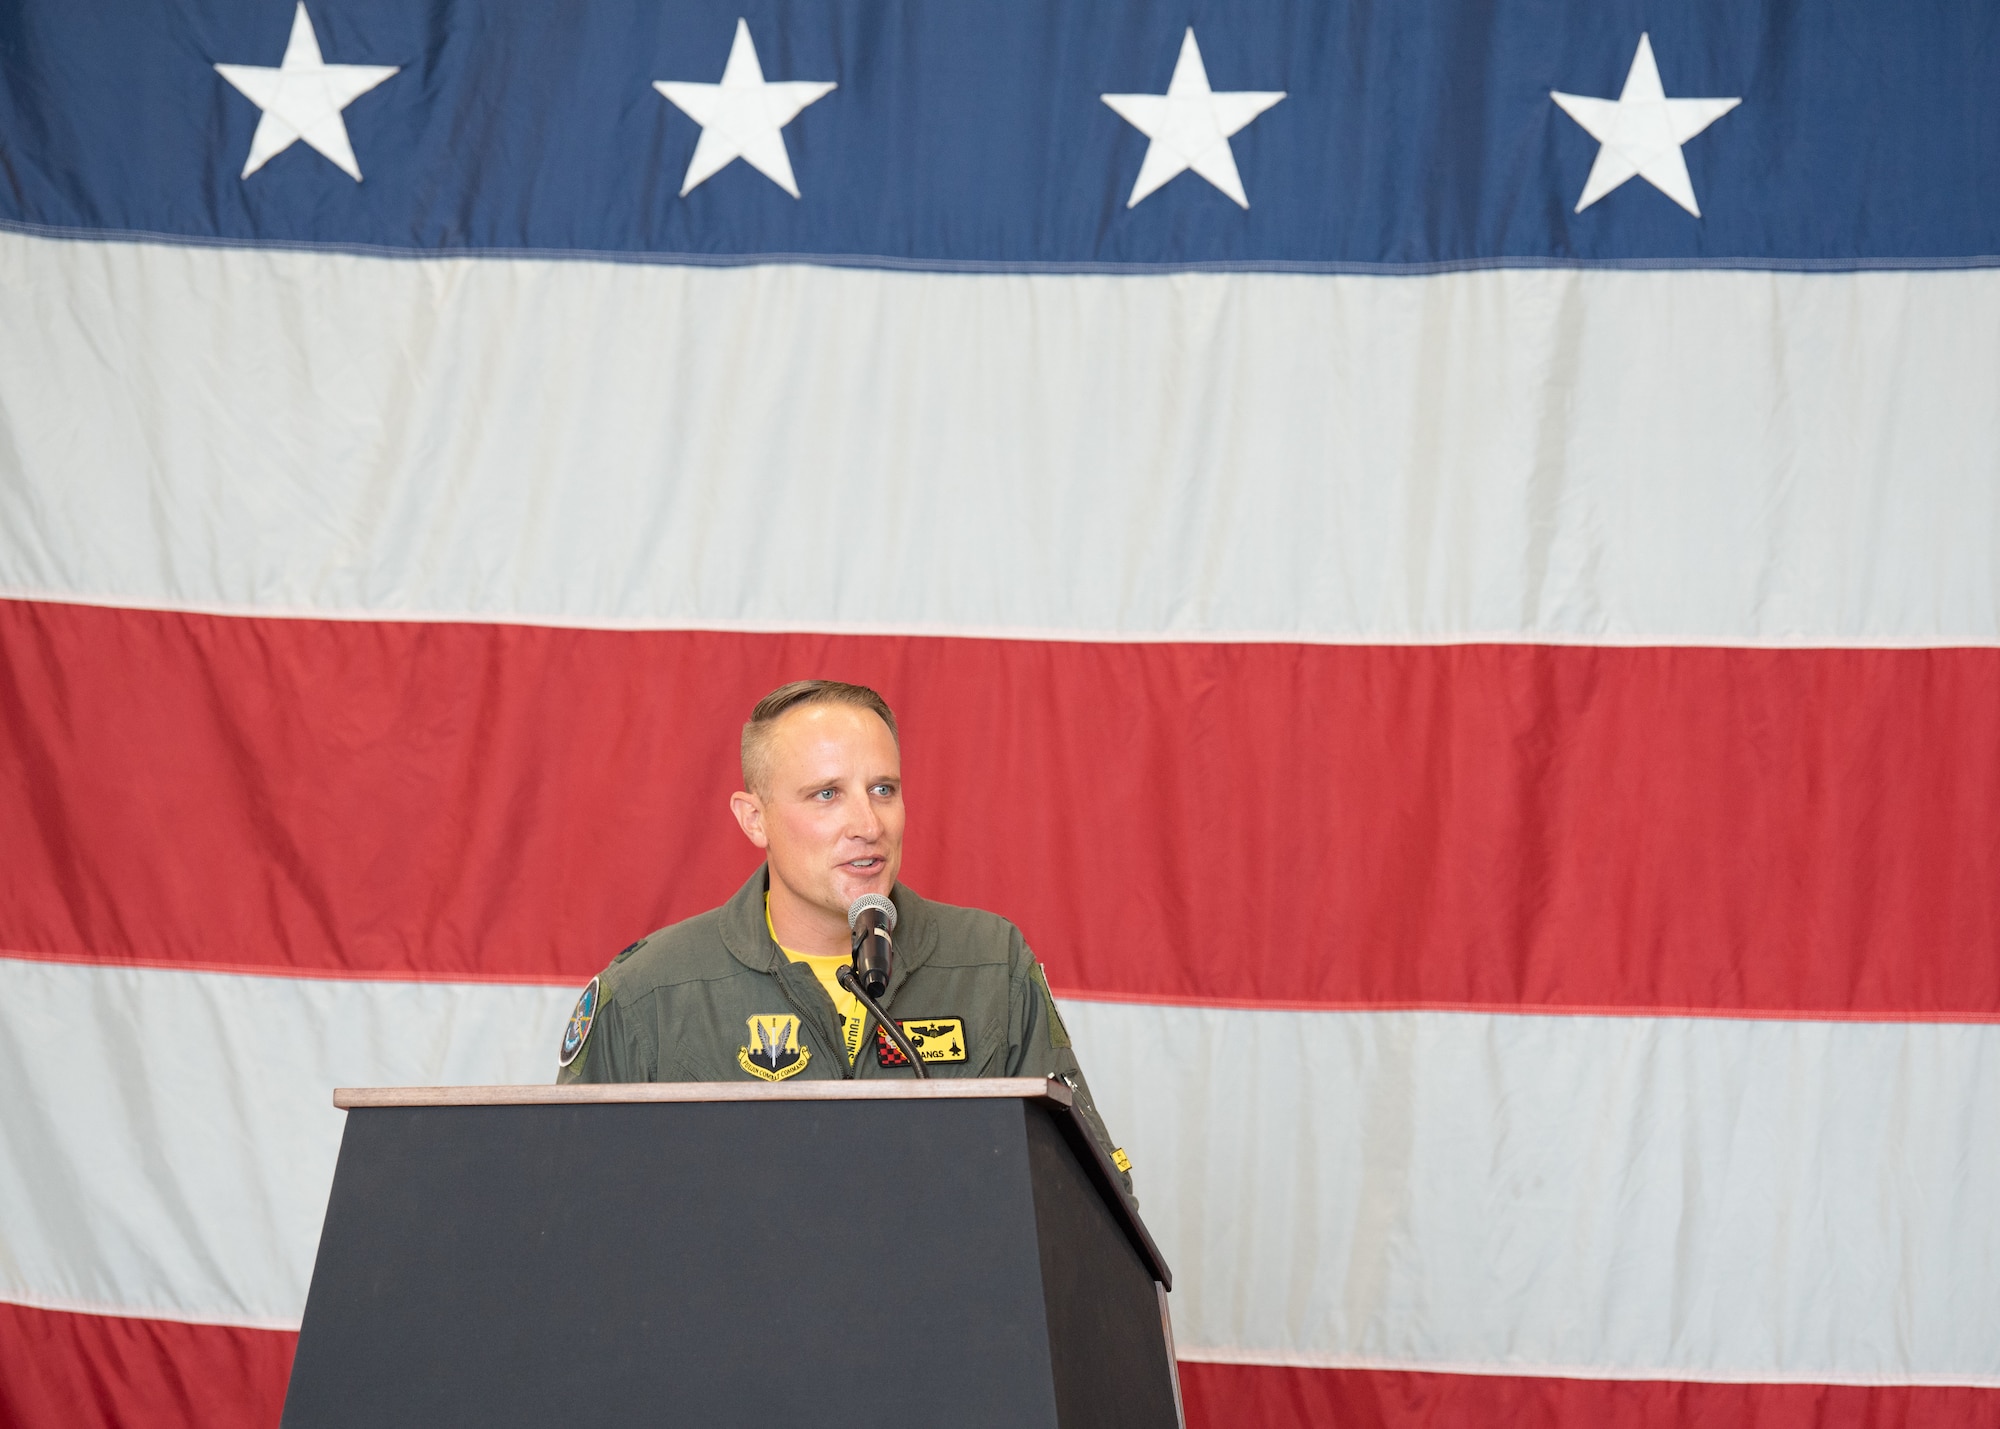 Lt. Col. Greg Farrell gives a speech after taking command of the 4th Fighter Squadron, at Hill Air Force Base, Utah, on July 1, 2021. Farrell previously served as the director of operations for the 421st Fighter Squadron. The 4th FS, the “Fighting Fuujins,” is one of three fighter squadrons that make up the 388th Operations Group, the other two squadrons are the 34th FS, the “Rude Rams,” and the 421st FS, the “Black Widows.” (U.S. Air Force photo by Staff Sergeant Thomas Barley)